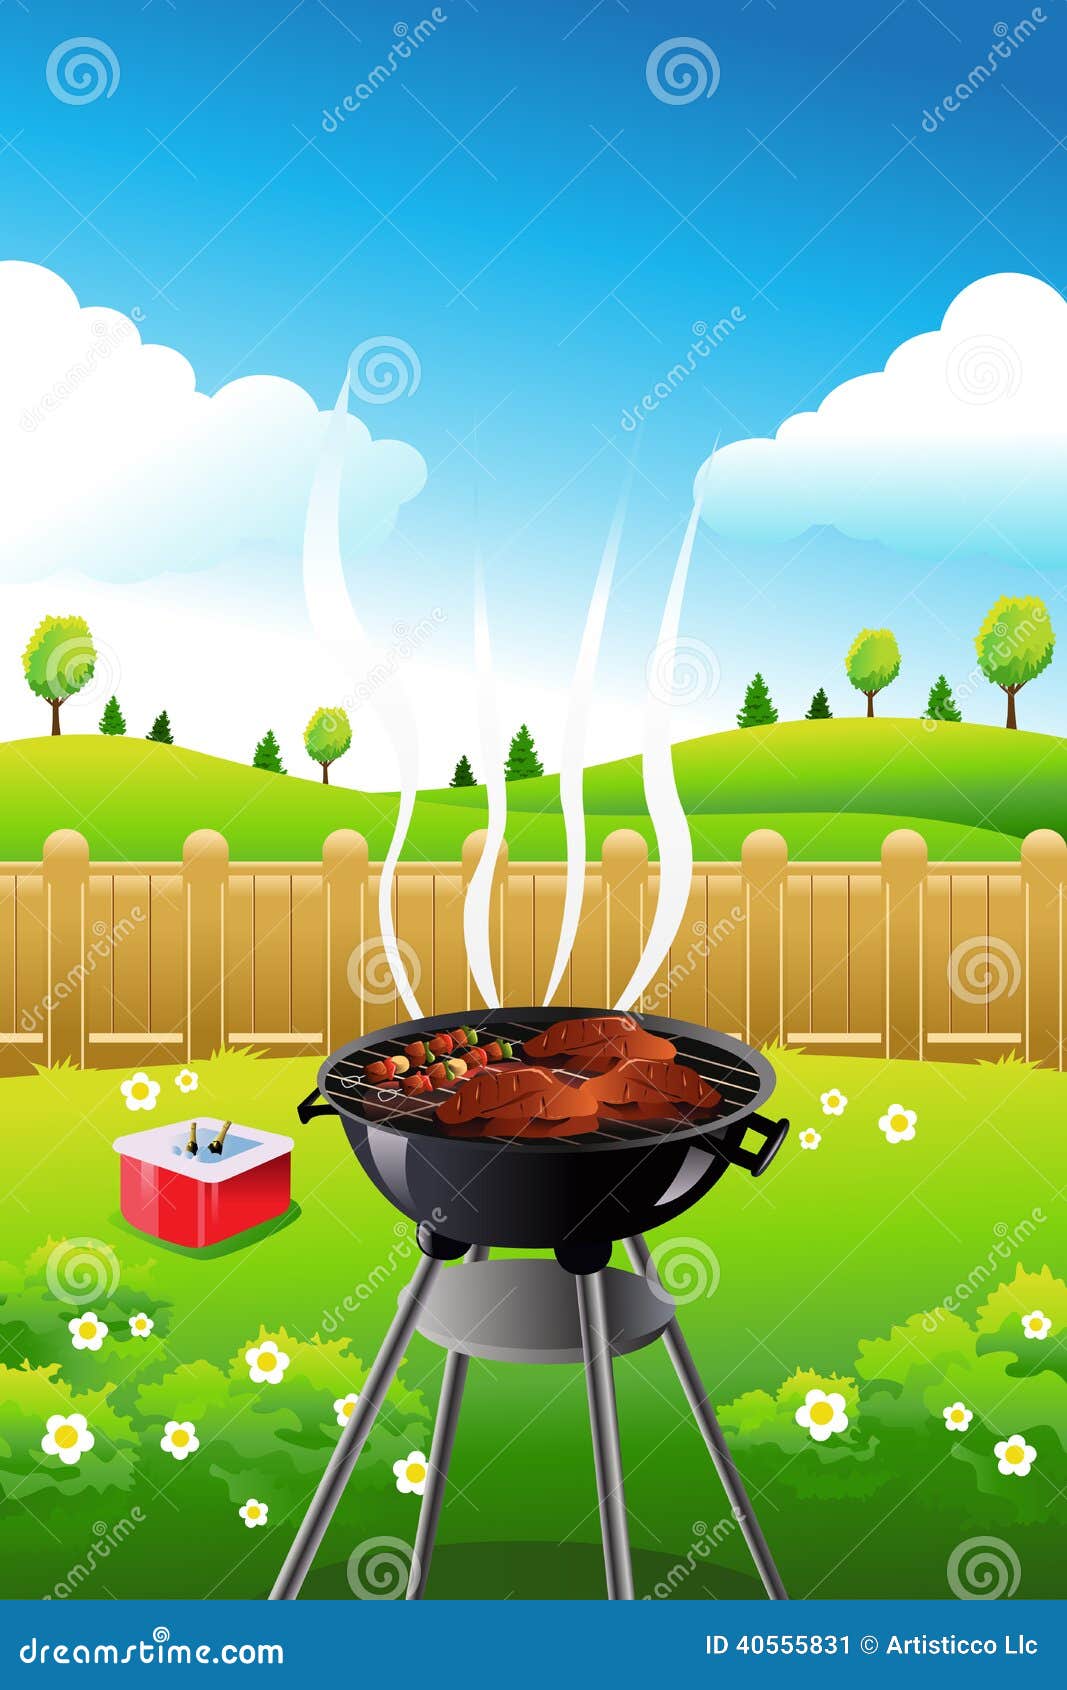 Bbq Party Clipart Stock Illustrations – Bbq Party Clipart Stock Illustrations, Vectors & Clipart - Dreamstime